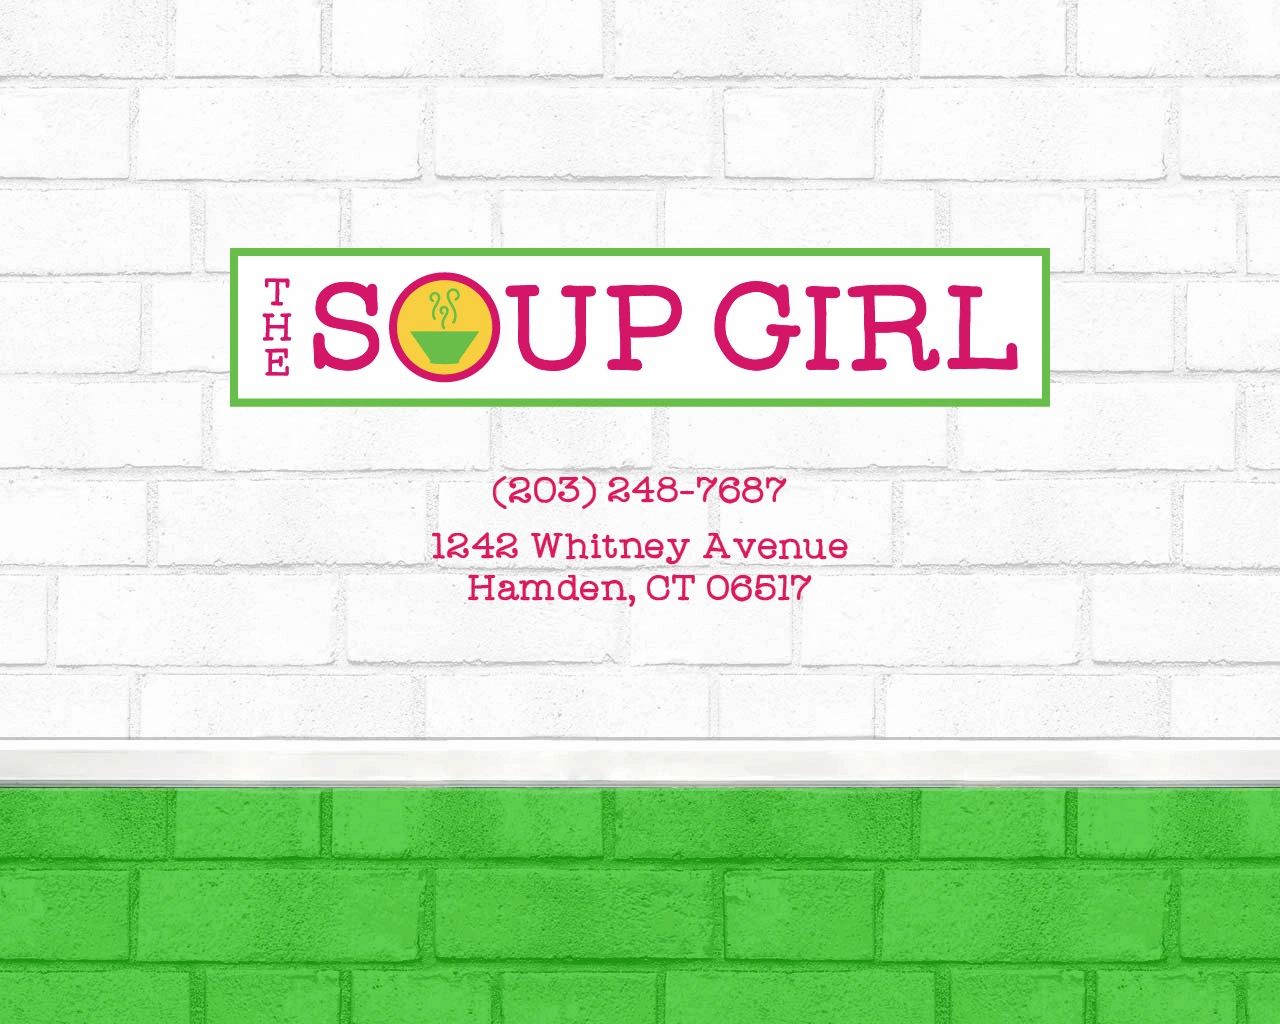 The Soup Girl